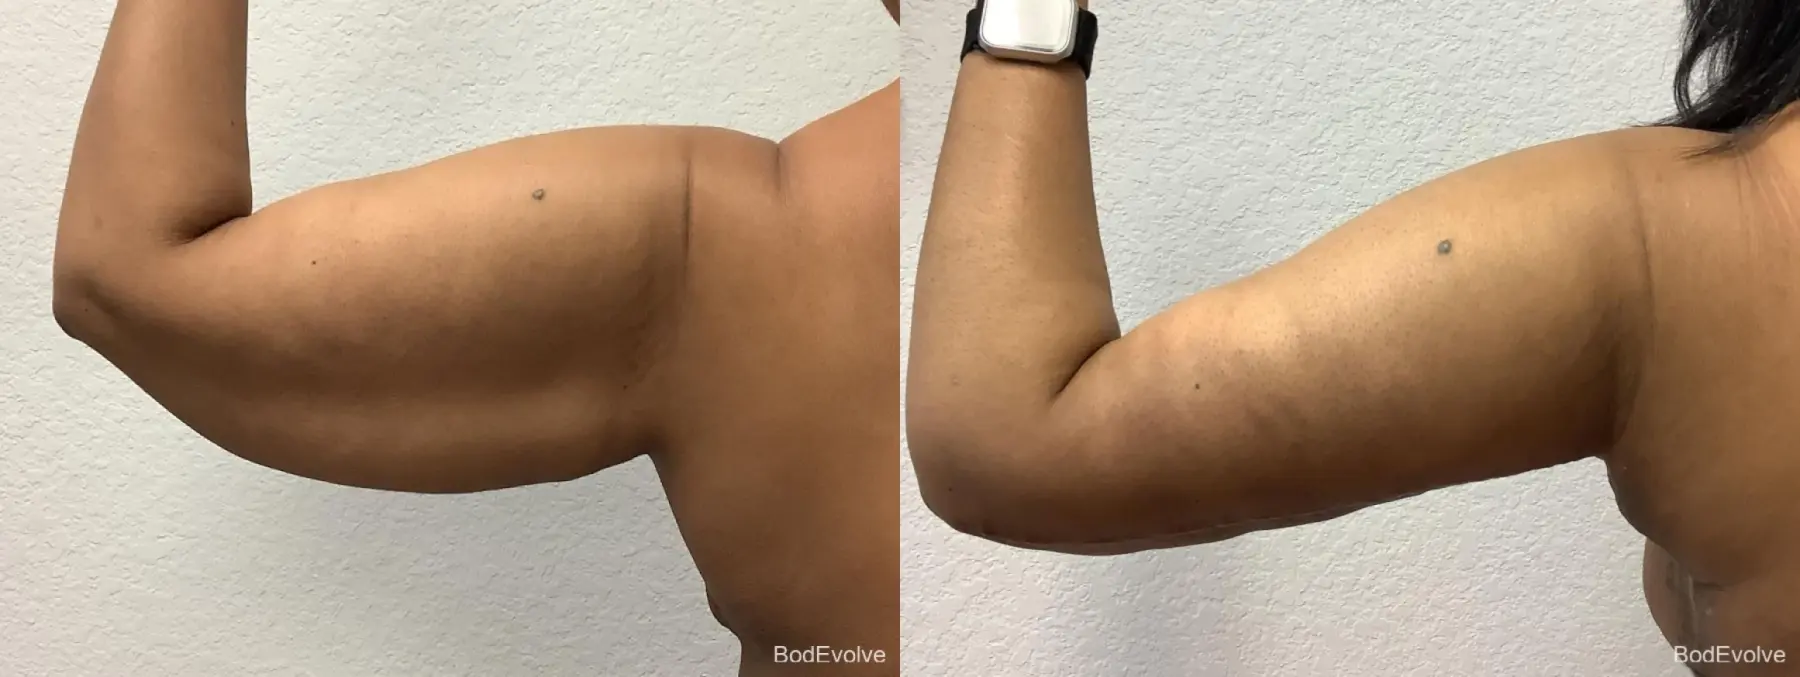 Arm Lift: Patient 5 - Before and After 4